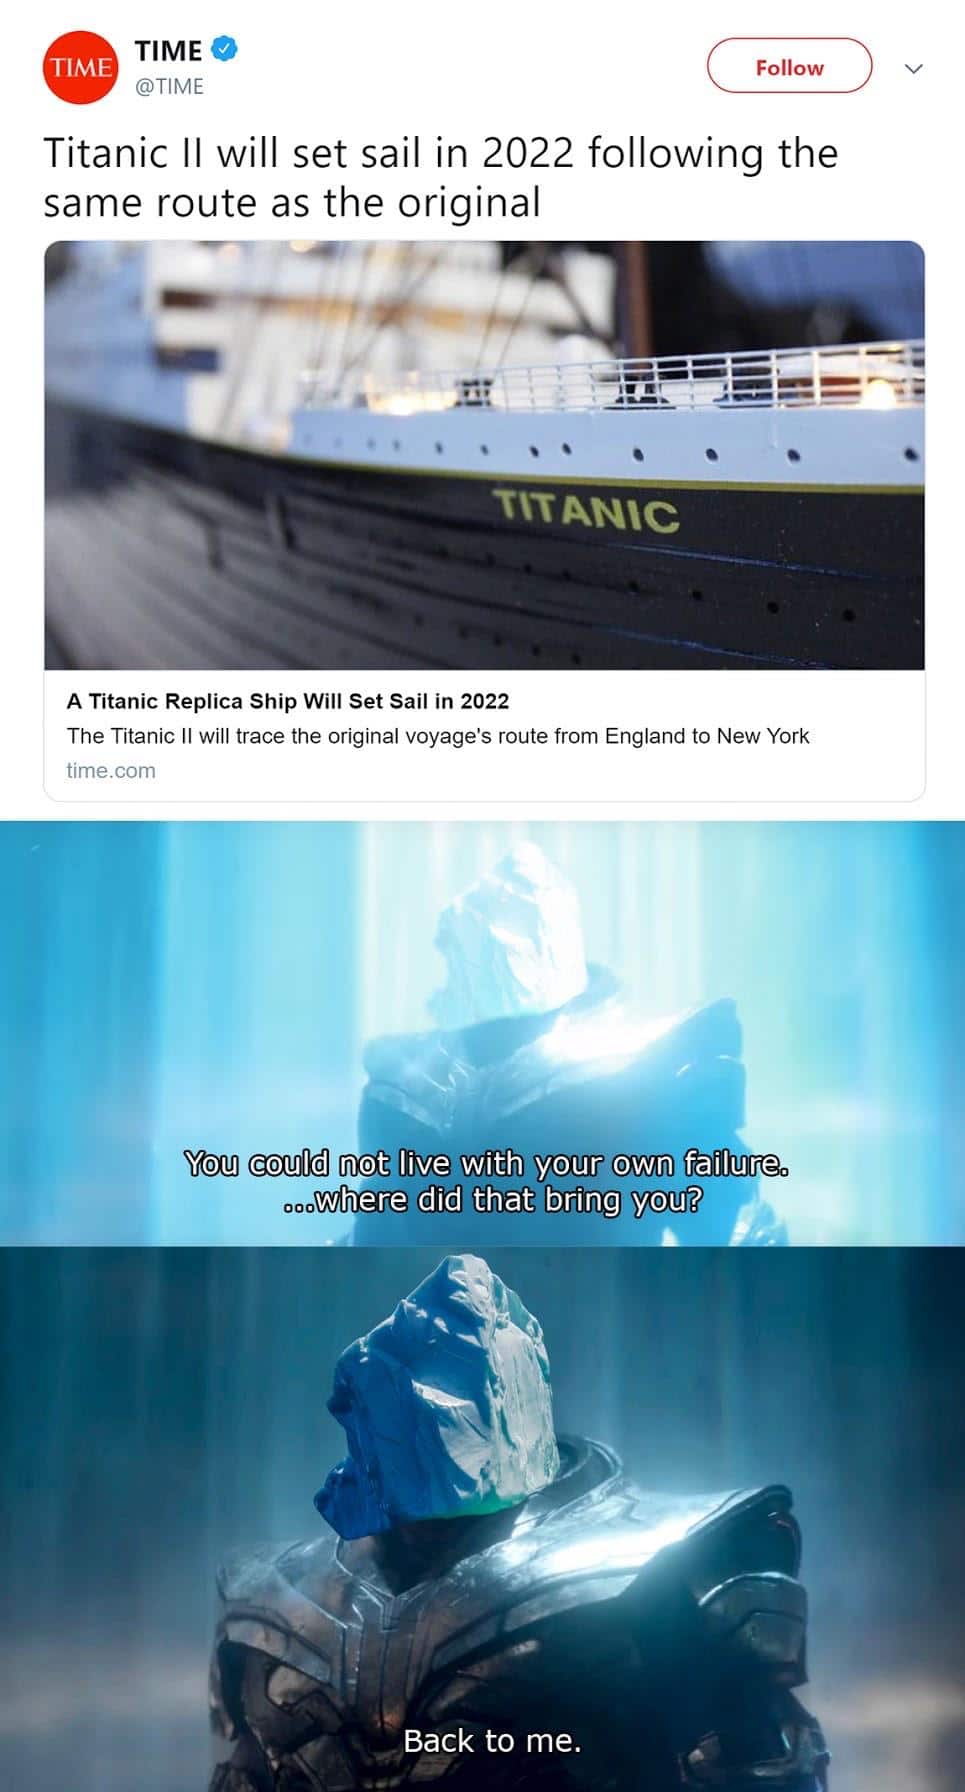 Thanos, Titanos, Electric Boogaloo Avengers Memes Thanos, Titanos, Electric Boogaloo text: TIME O TIME @TIME Follow Titanic Il will set sail in 2022 following the same route as the original ANC A Titanic Replica Ship Will Set Sail in 2022 The Titanic Il will trace the original voyage's route from England to New York time.com You could not live with yourown failure. • ...where did that bring,yoy? 000 Back to me. 